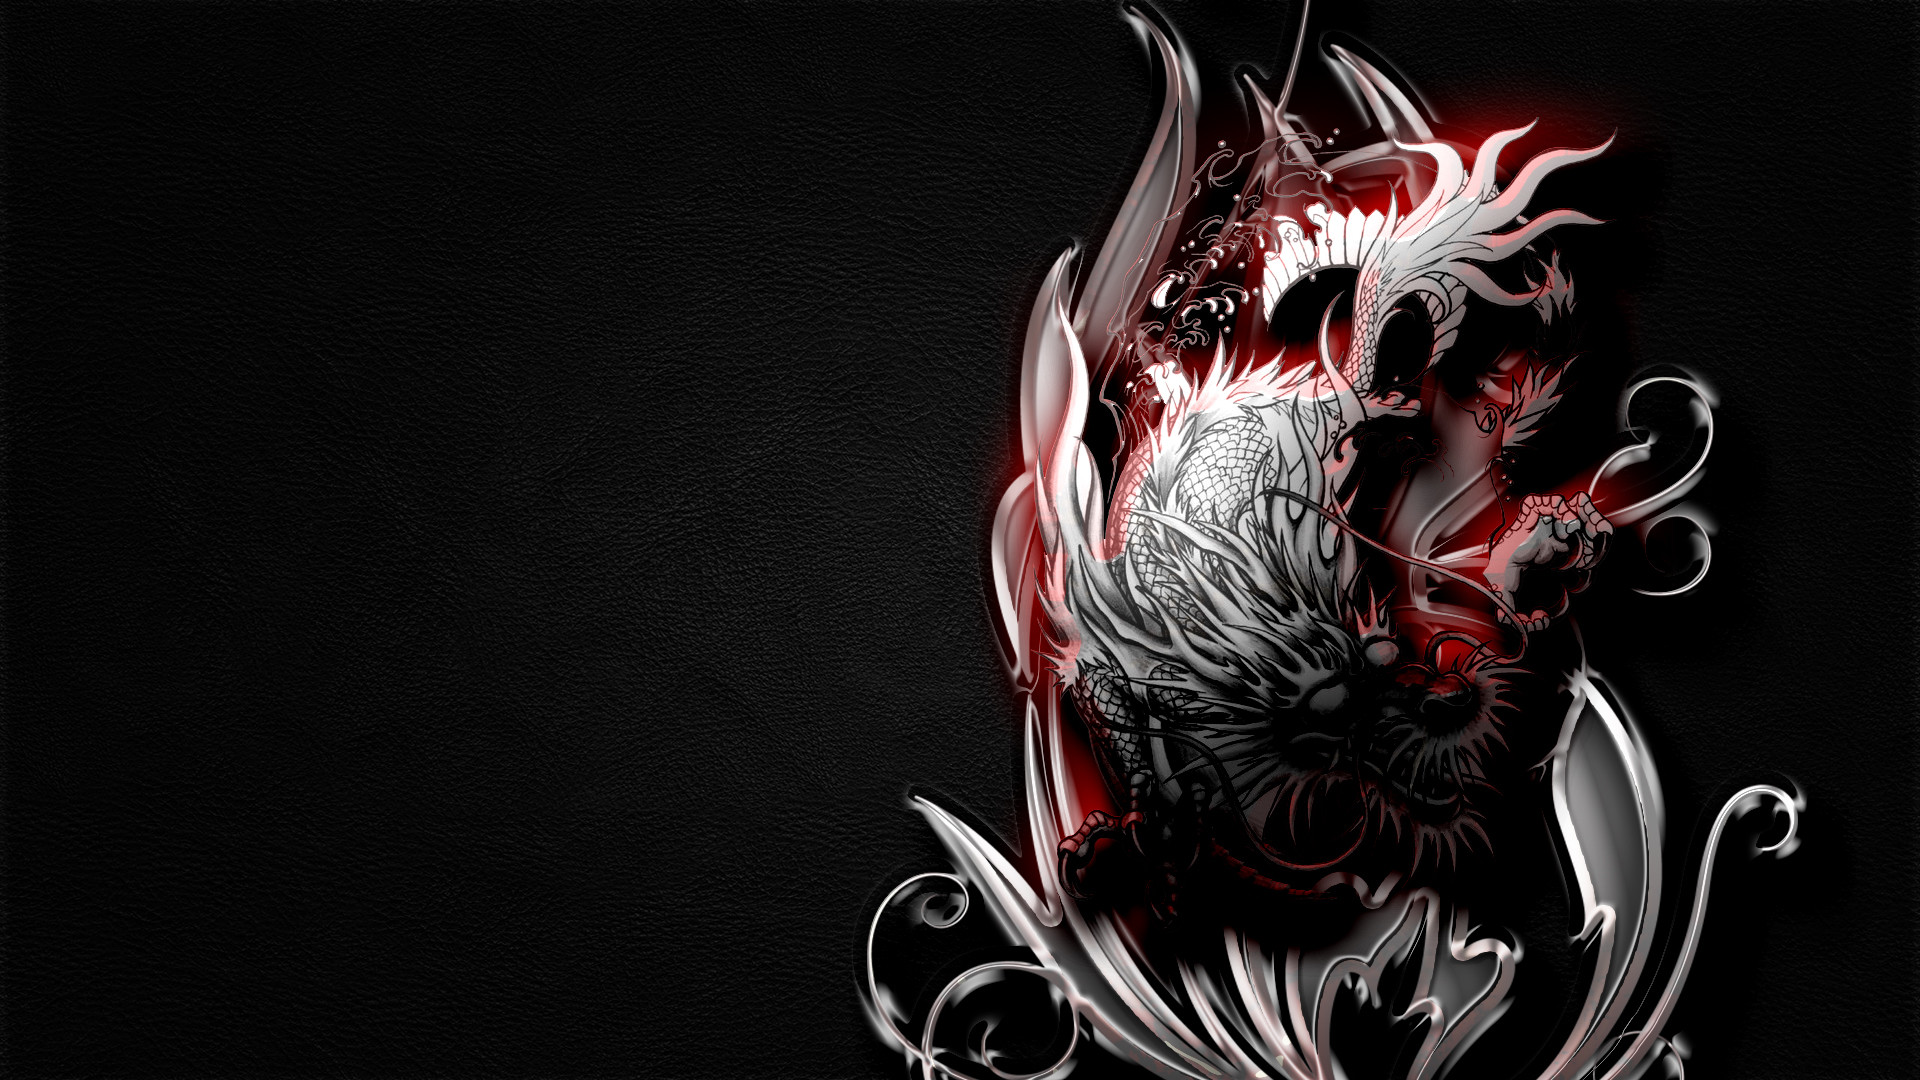 1920x1080 DRAGONS USED ARE STENCIL FROM WHEN I DID TATS